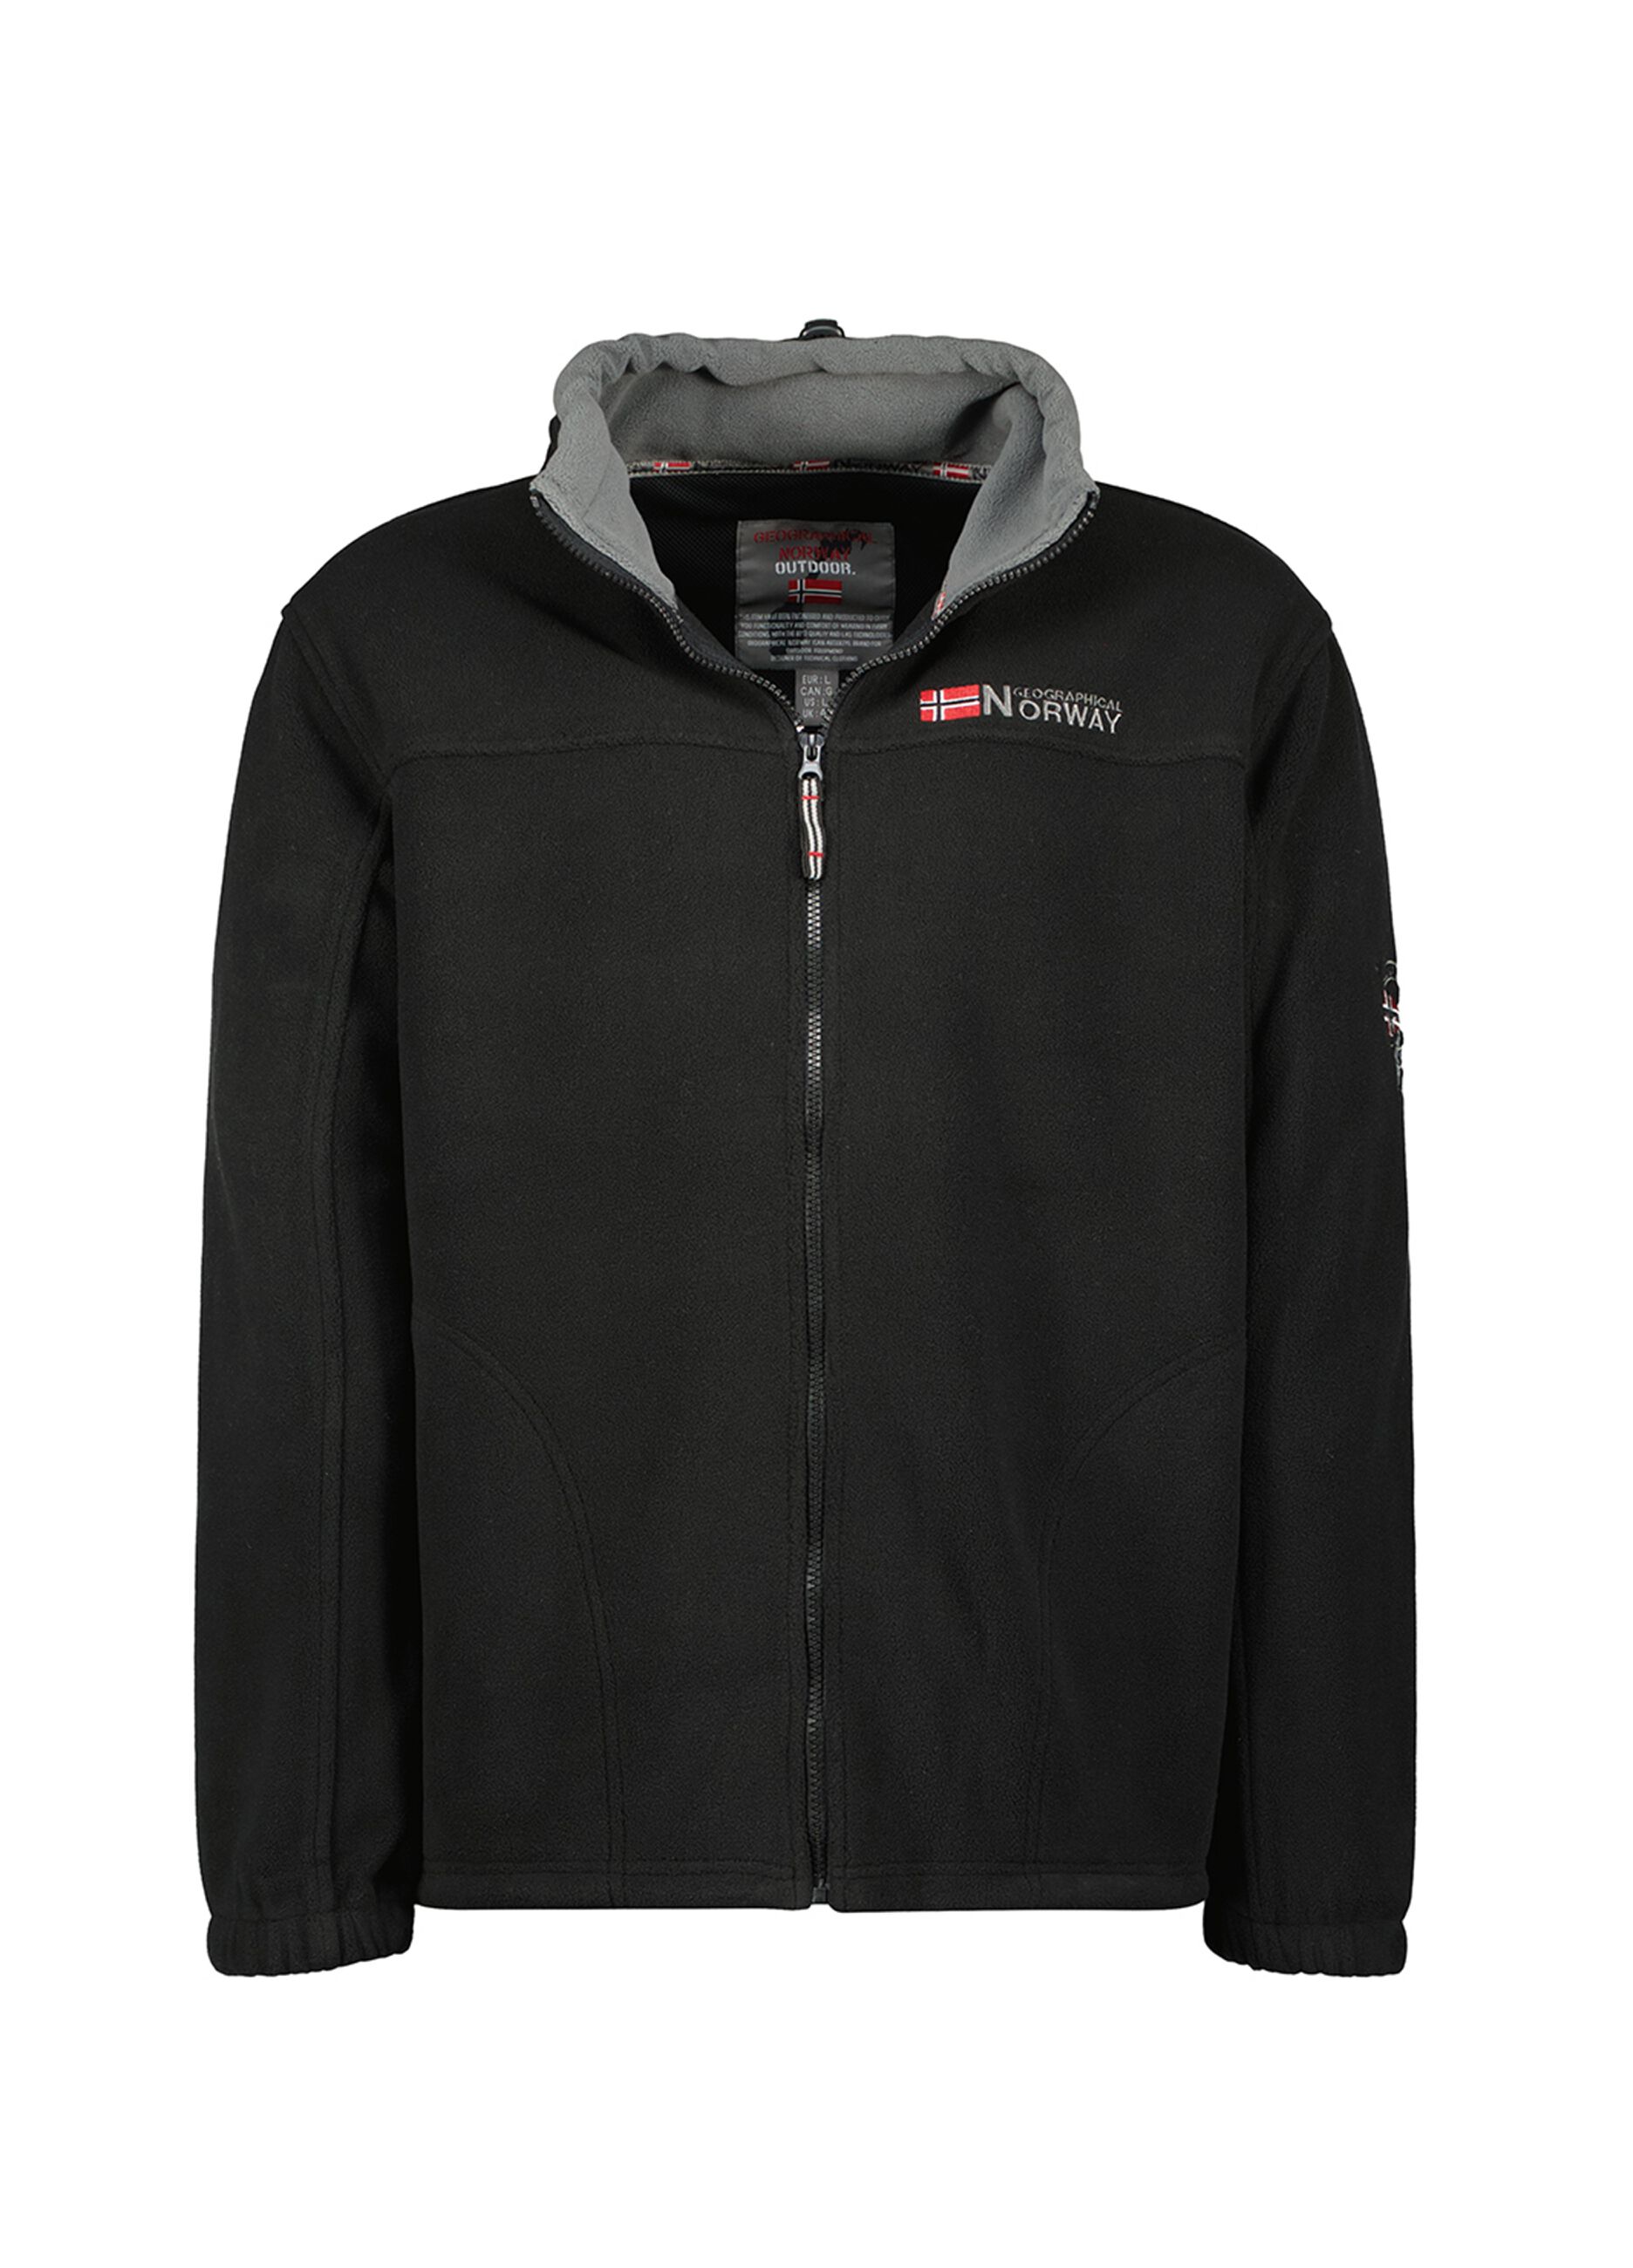 GEOGRAPHICAL NORWAY Man's Black Geographical Norway fleece polar